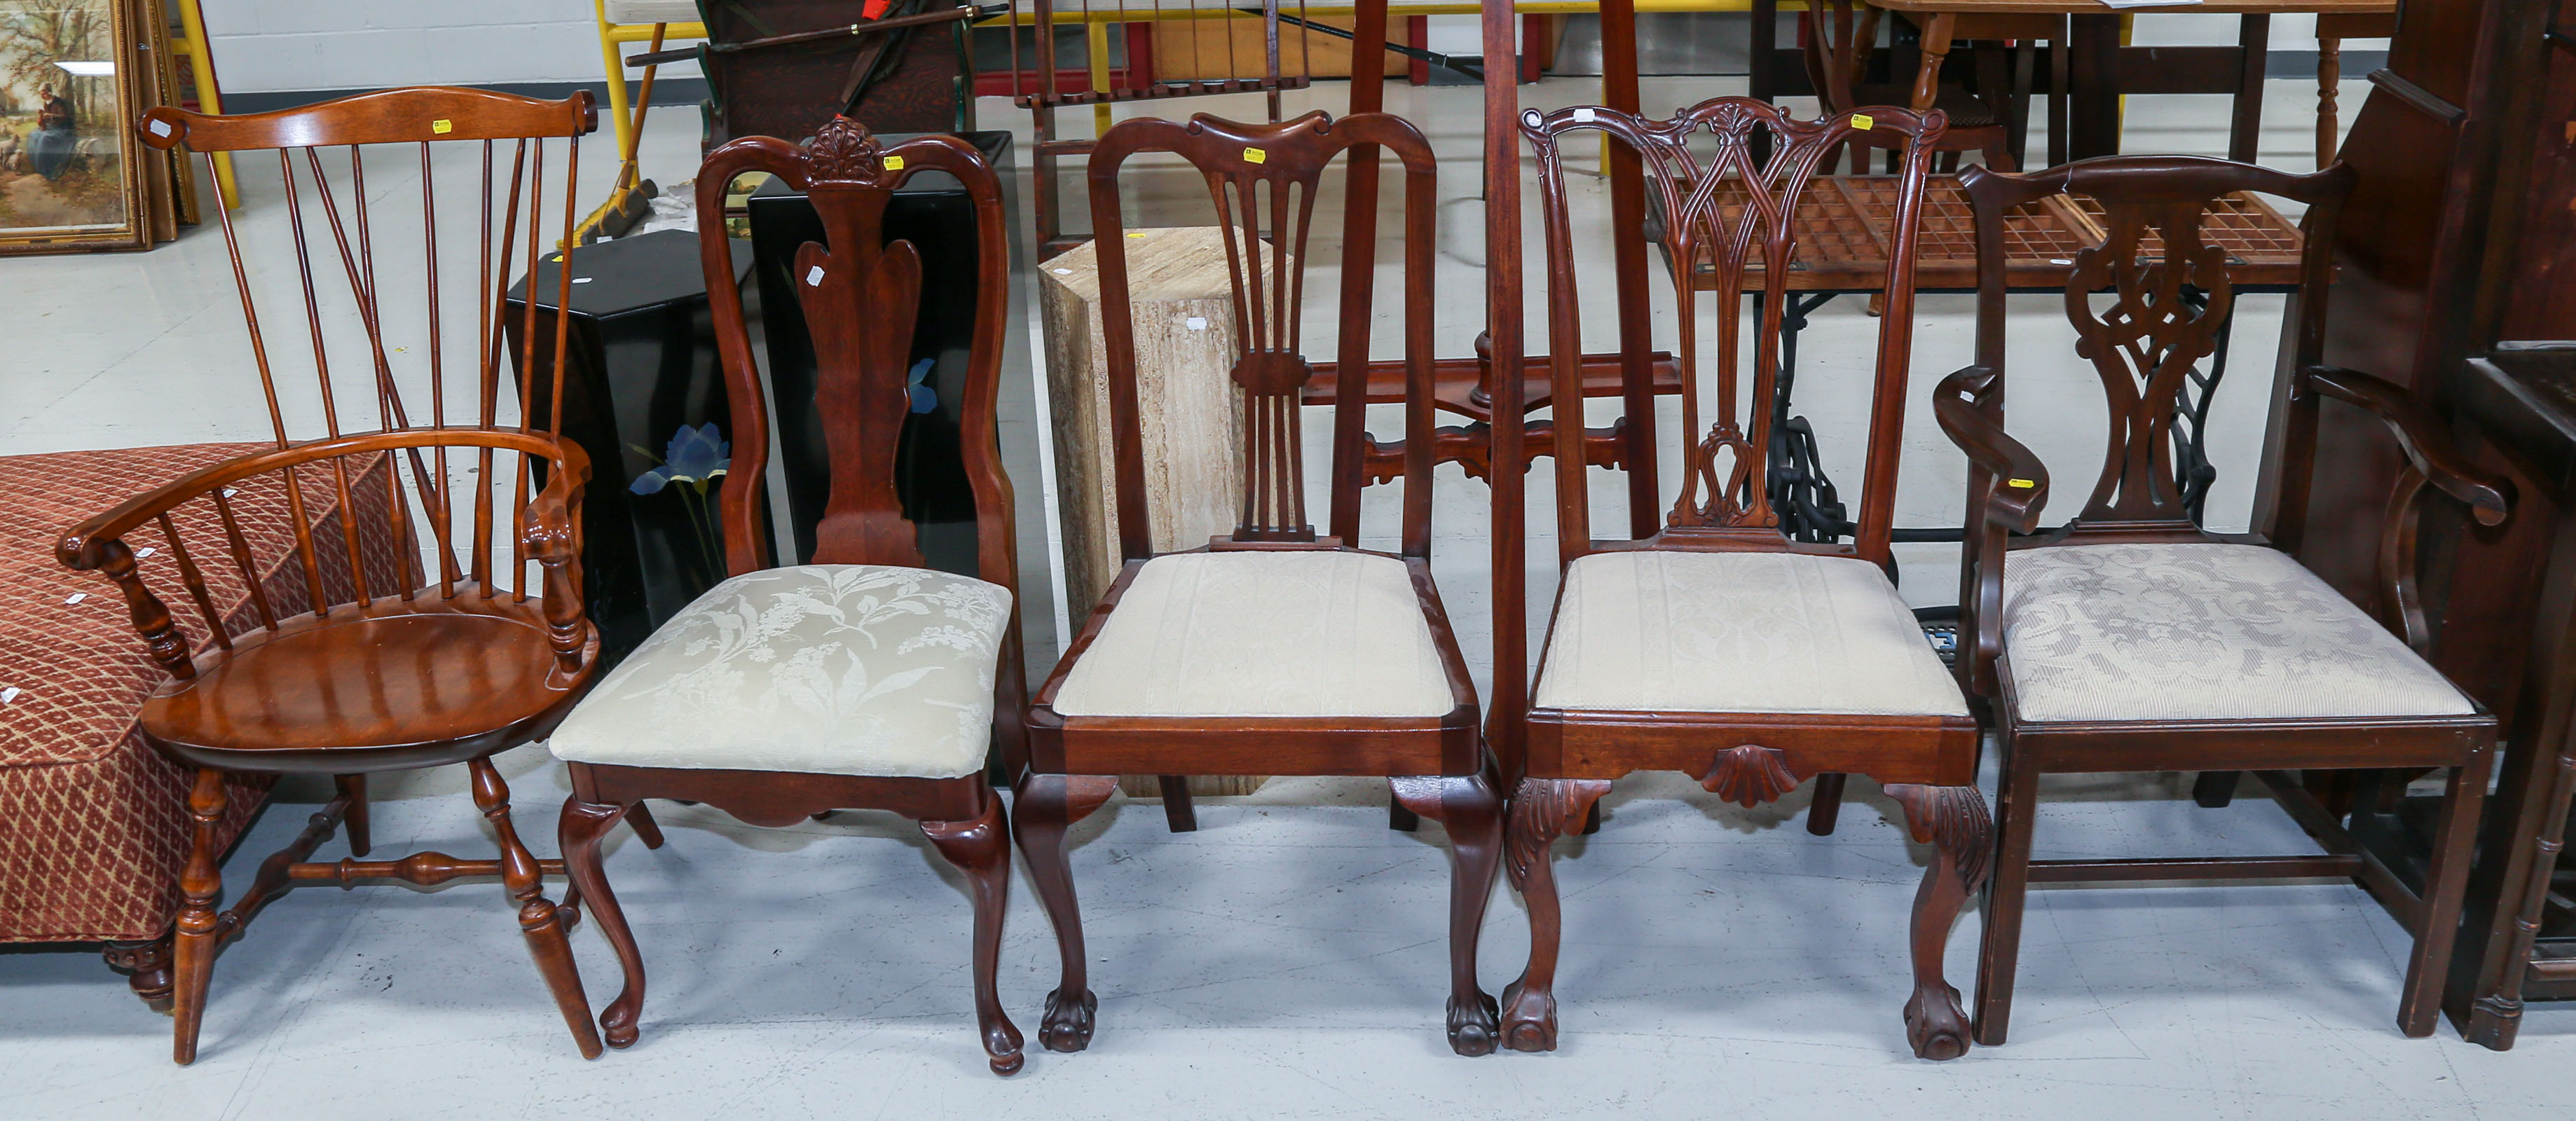 FIVE ASSORTED CHAIRS Including 2ea46c